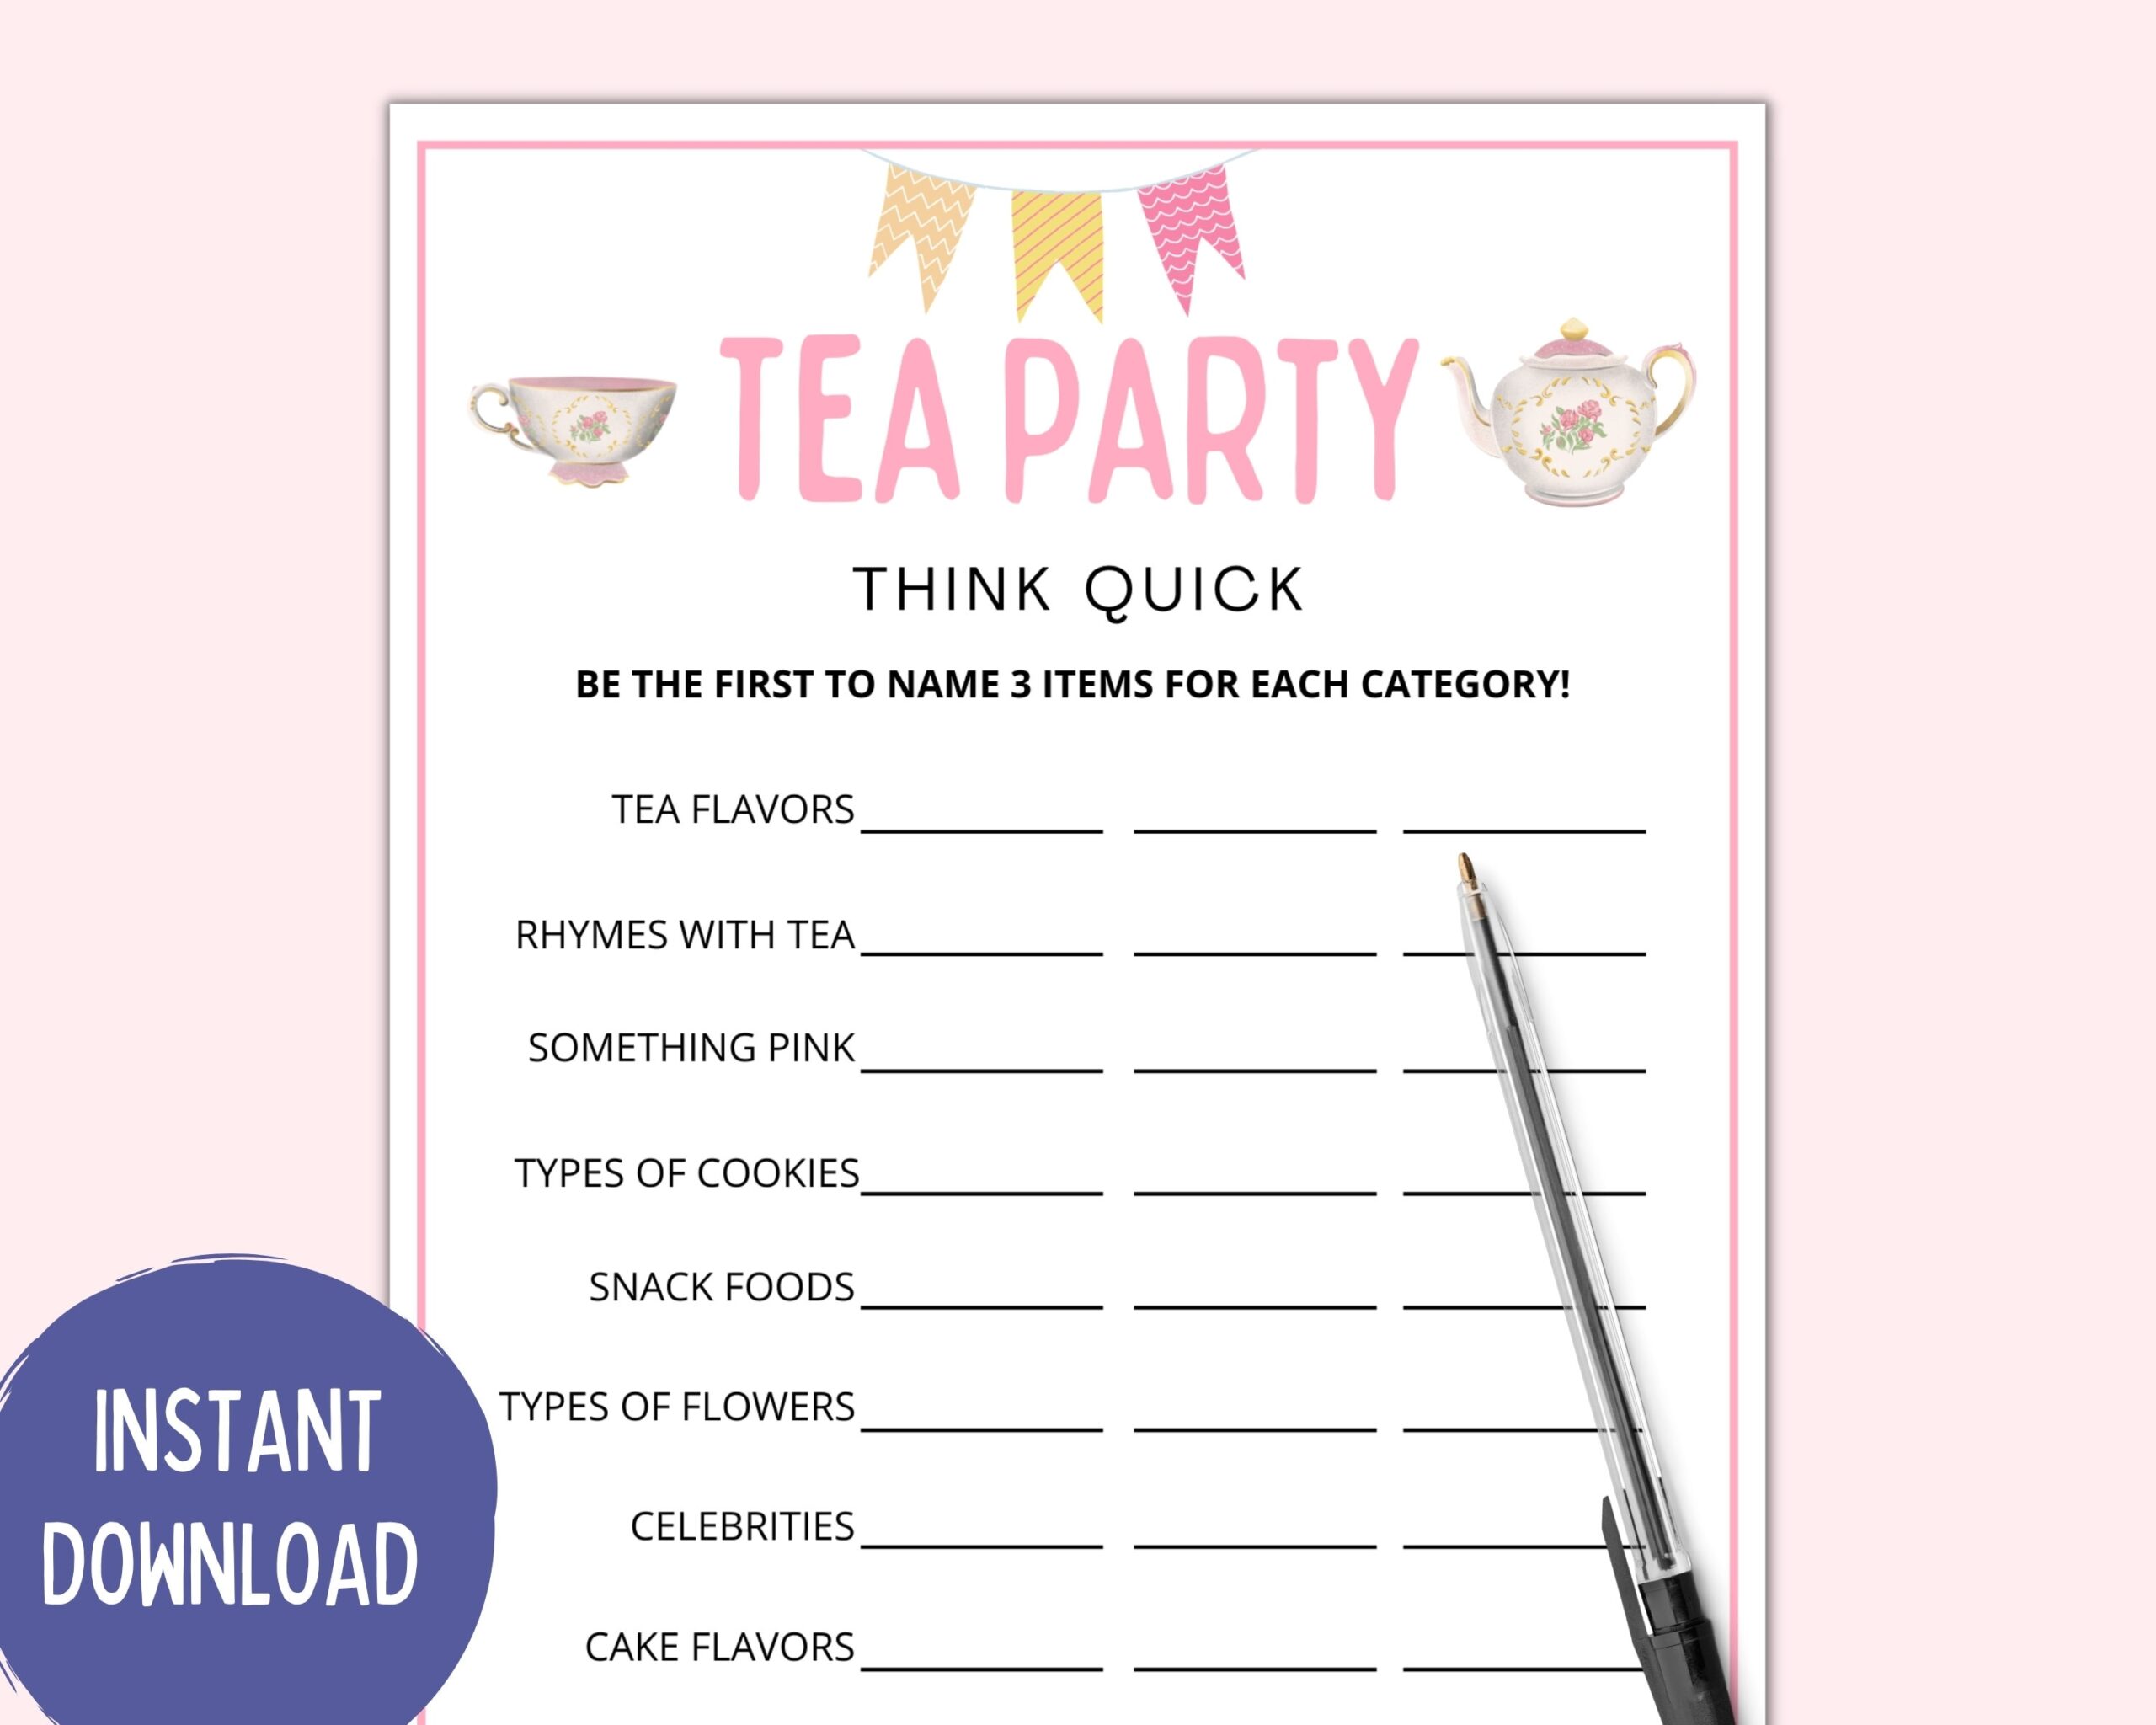 Tea Party Think Quick Tea Party Games Tea Party Games Adults Kids Toddler Tea Party Printable Games Tea Party Bridal Baby Shower Etsy